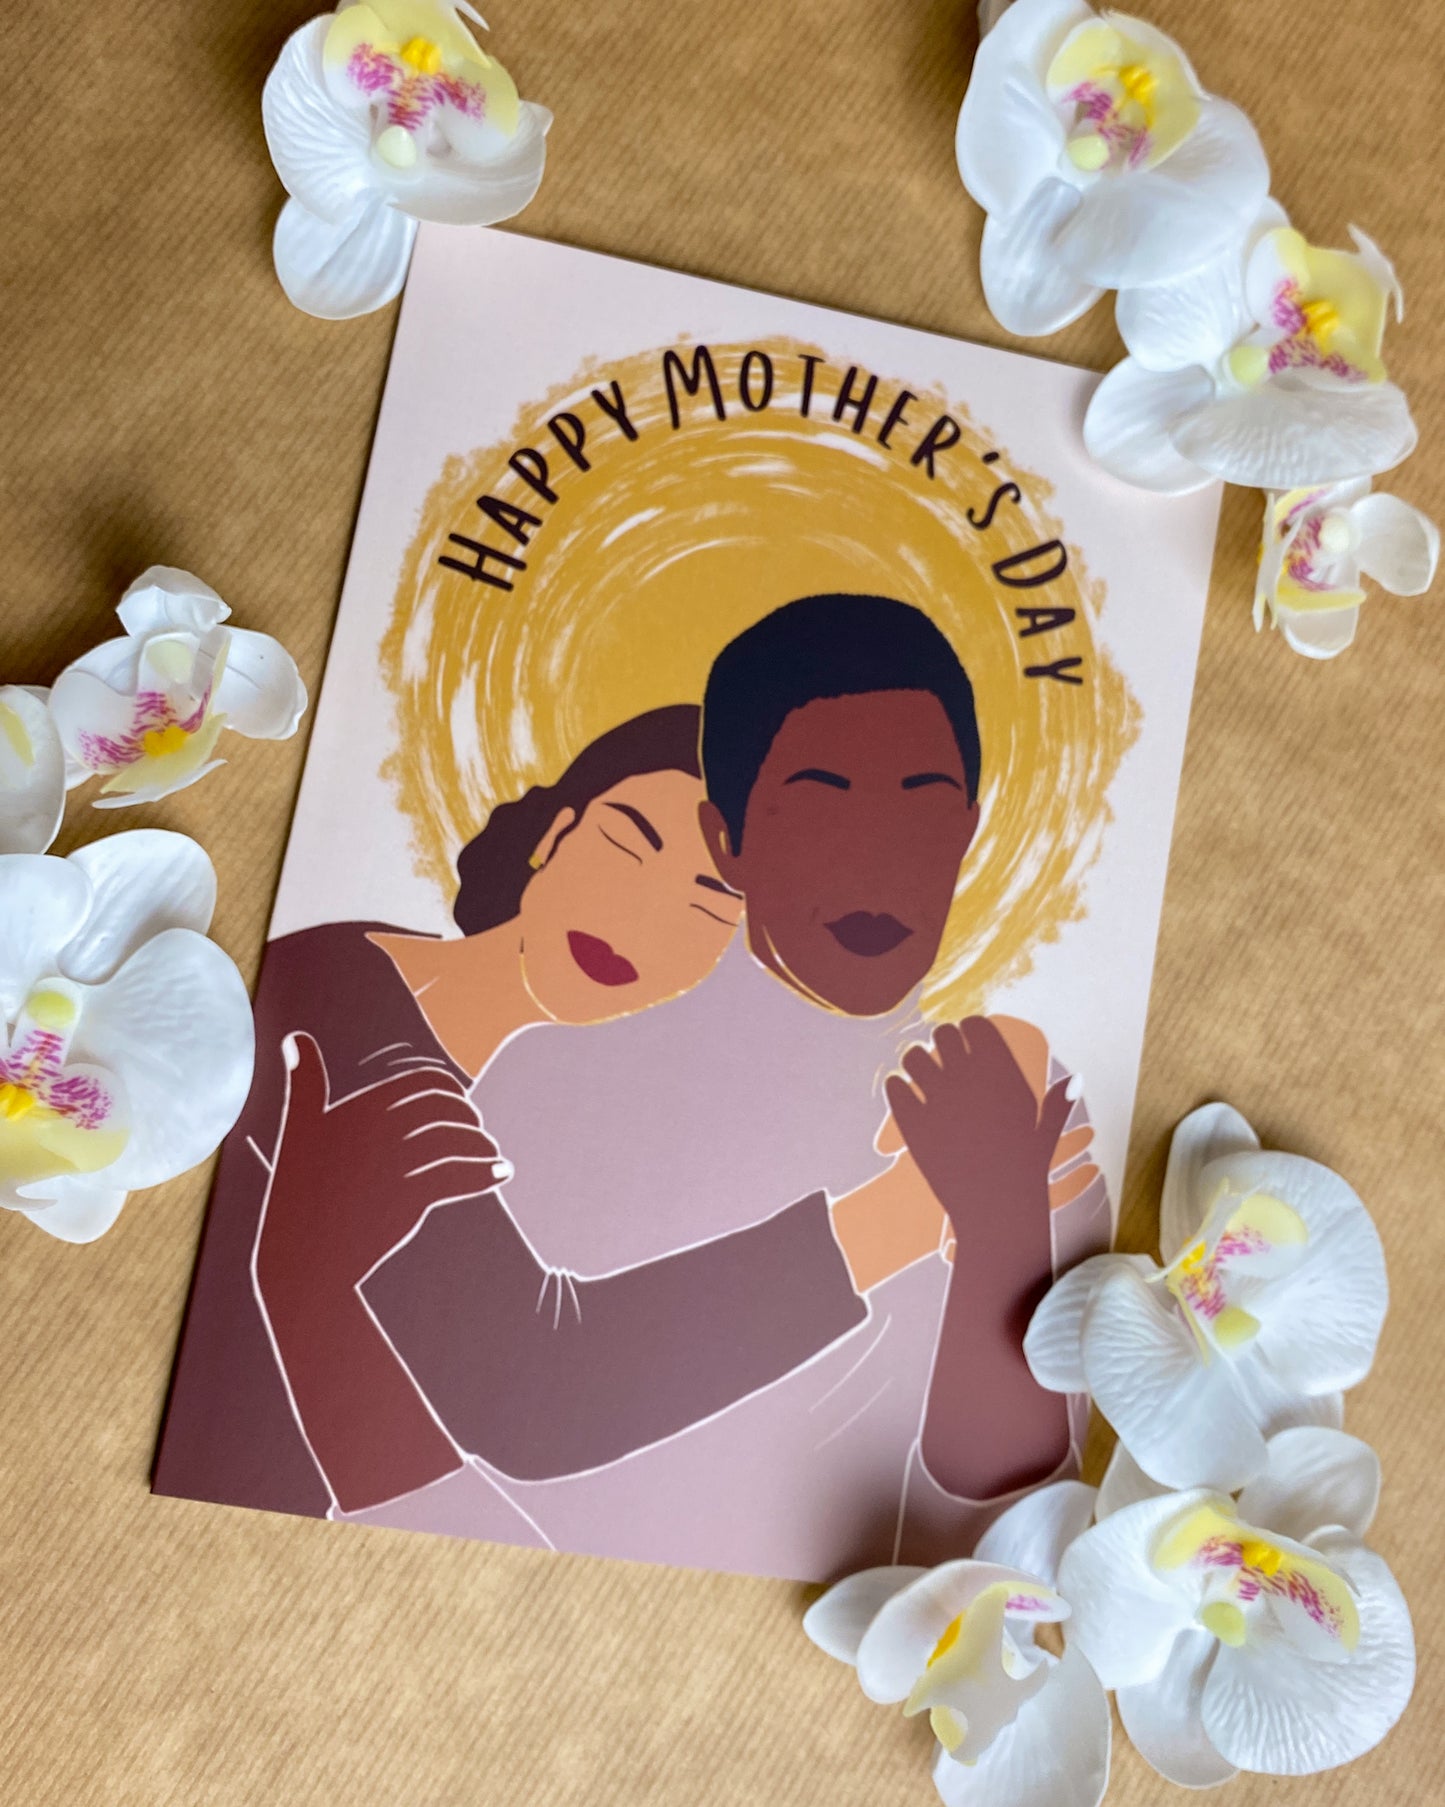 I Love You Mum Mixed Race / Black Mother & Daughter - Mother’s Day Card - Black Queen - Mom Mama Alexis